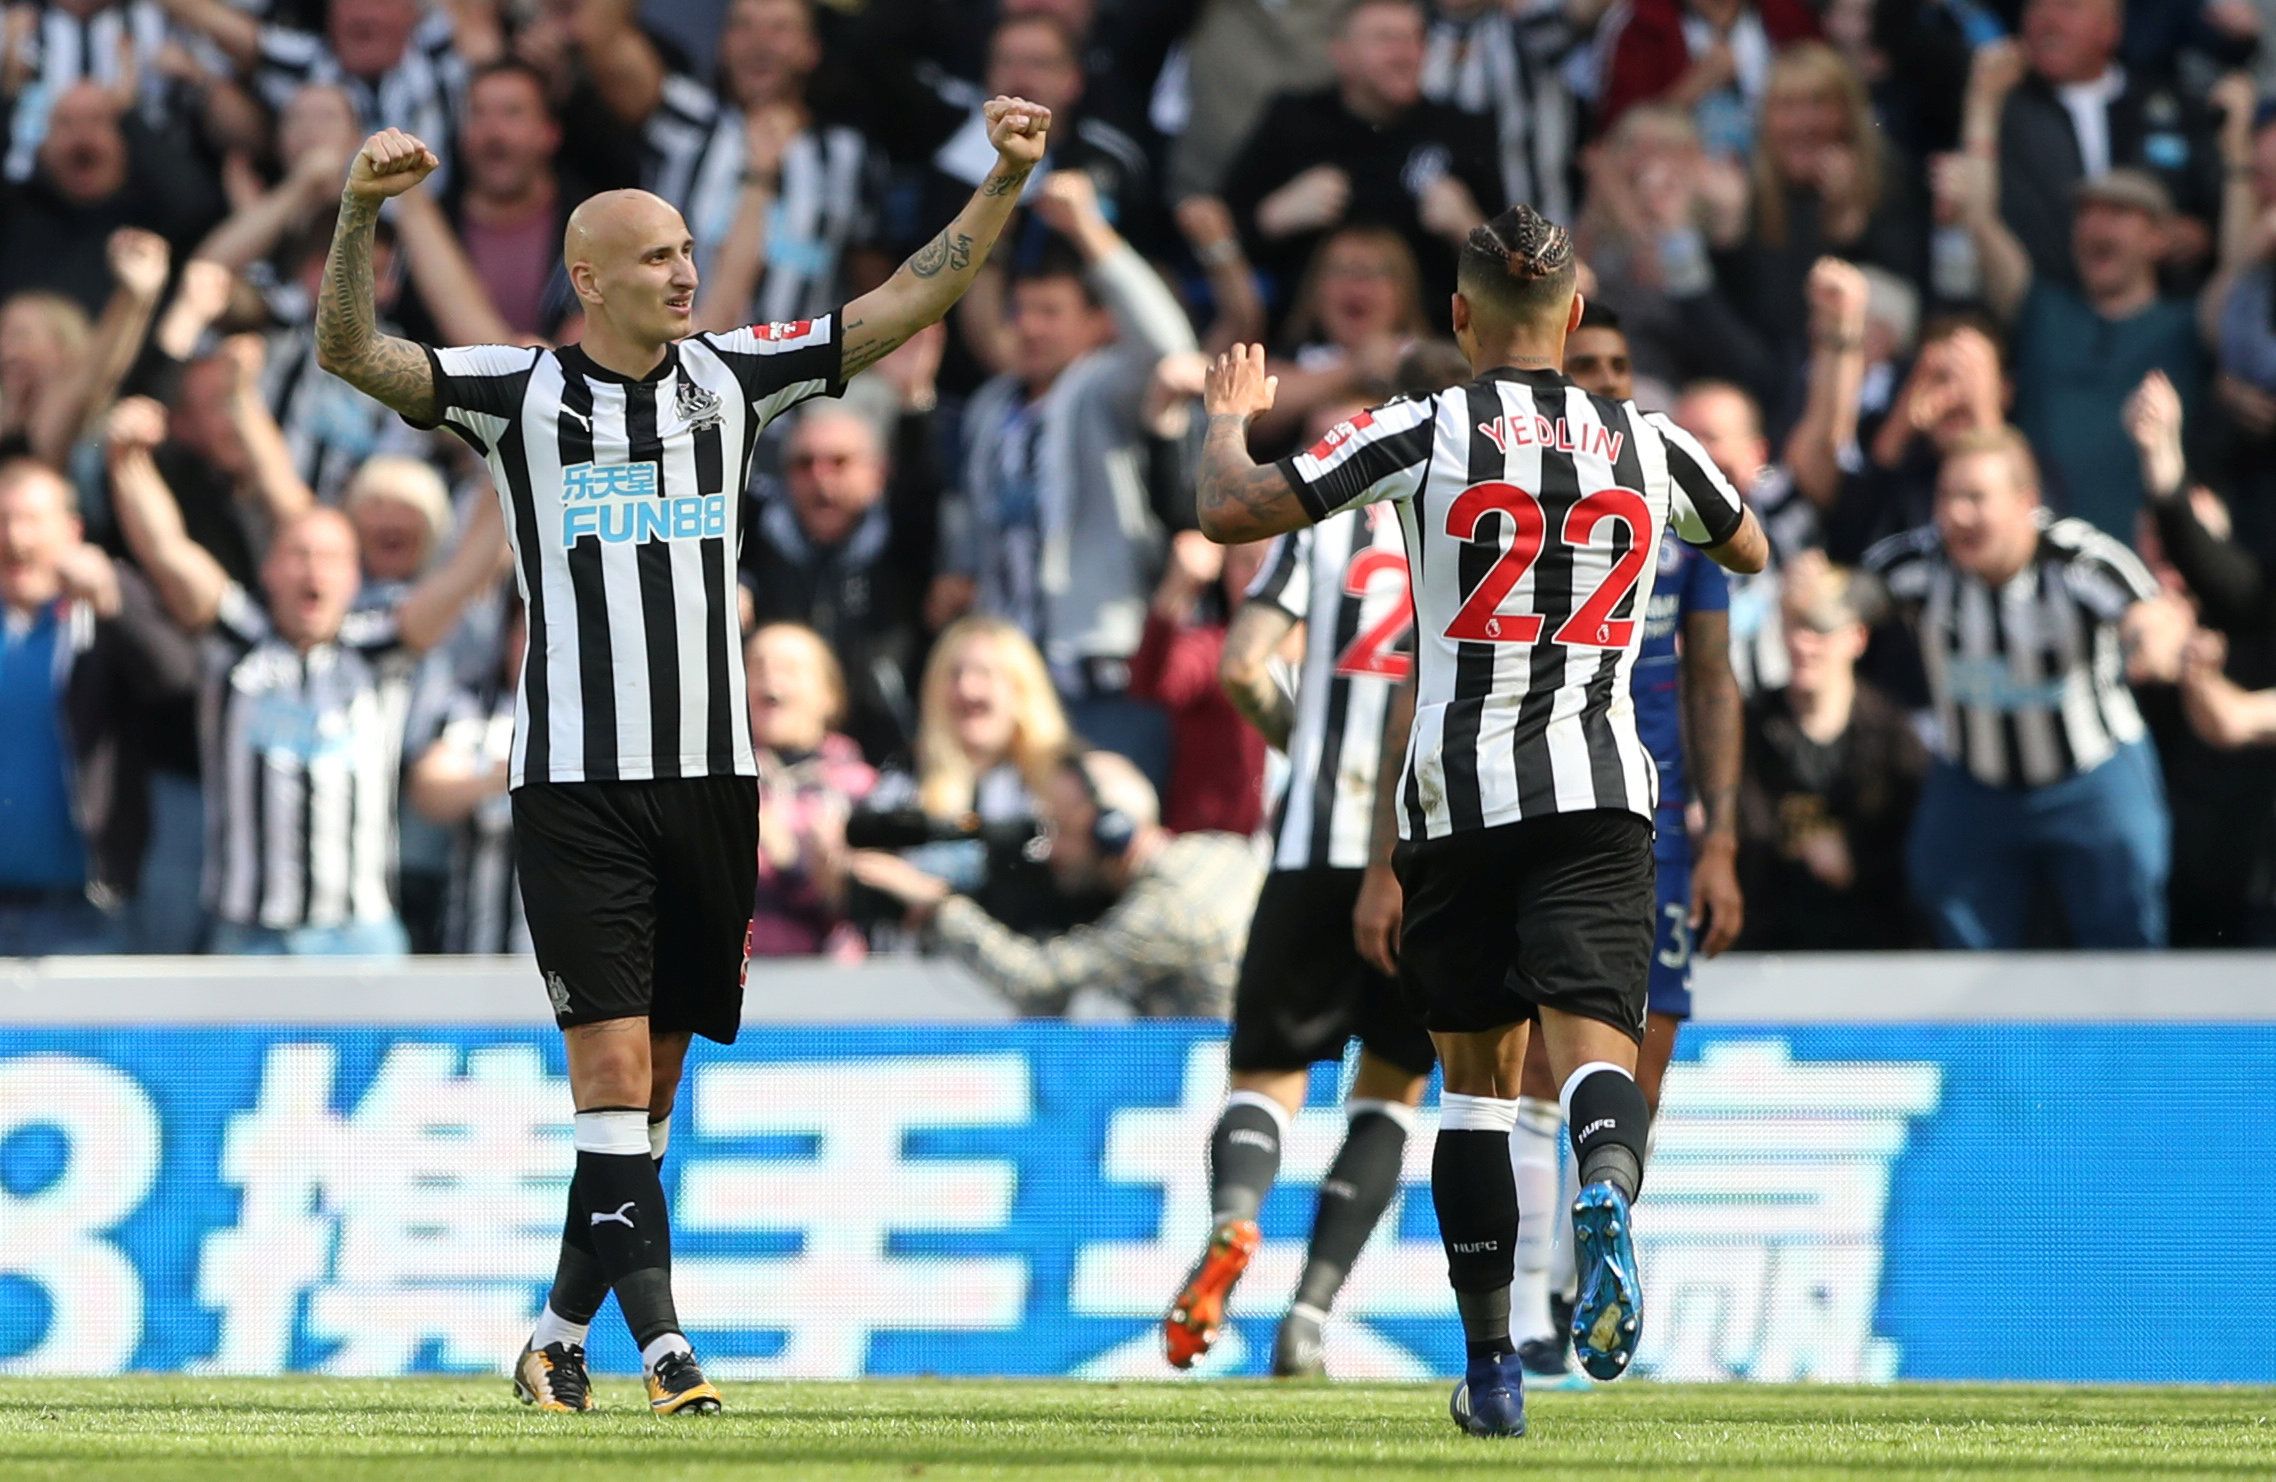 Soccer Football - Premier League - Newcastle United vs Chelsea - St James' Park, Newcastle, Britain - May 13, 2018   Newcastle United's Jonjo Shelvey celebrates after Ayoze Perez scores their second goal    REUTERS/Scott Heppell    EDITORIAL USE ONLY. No use with unauthorized audio, video, data, fixture lists, club/league logos or "live" services. Online in-match use limited to 75 images, no video emulation. No use in betting, games or single club/league/player publications.  Please contact your